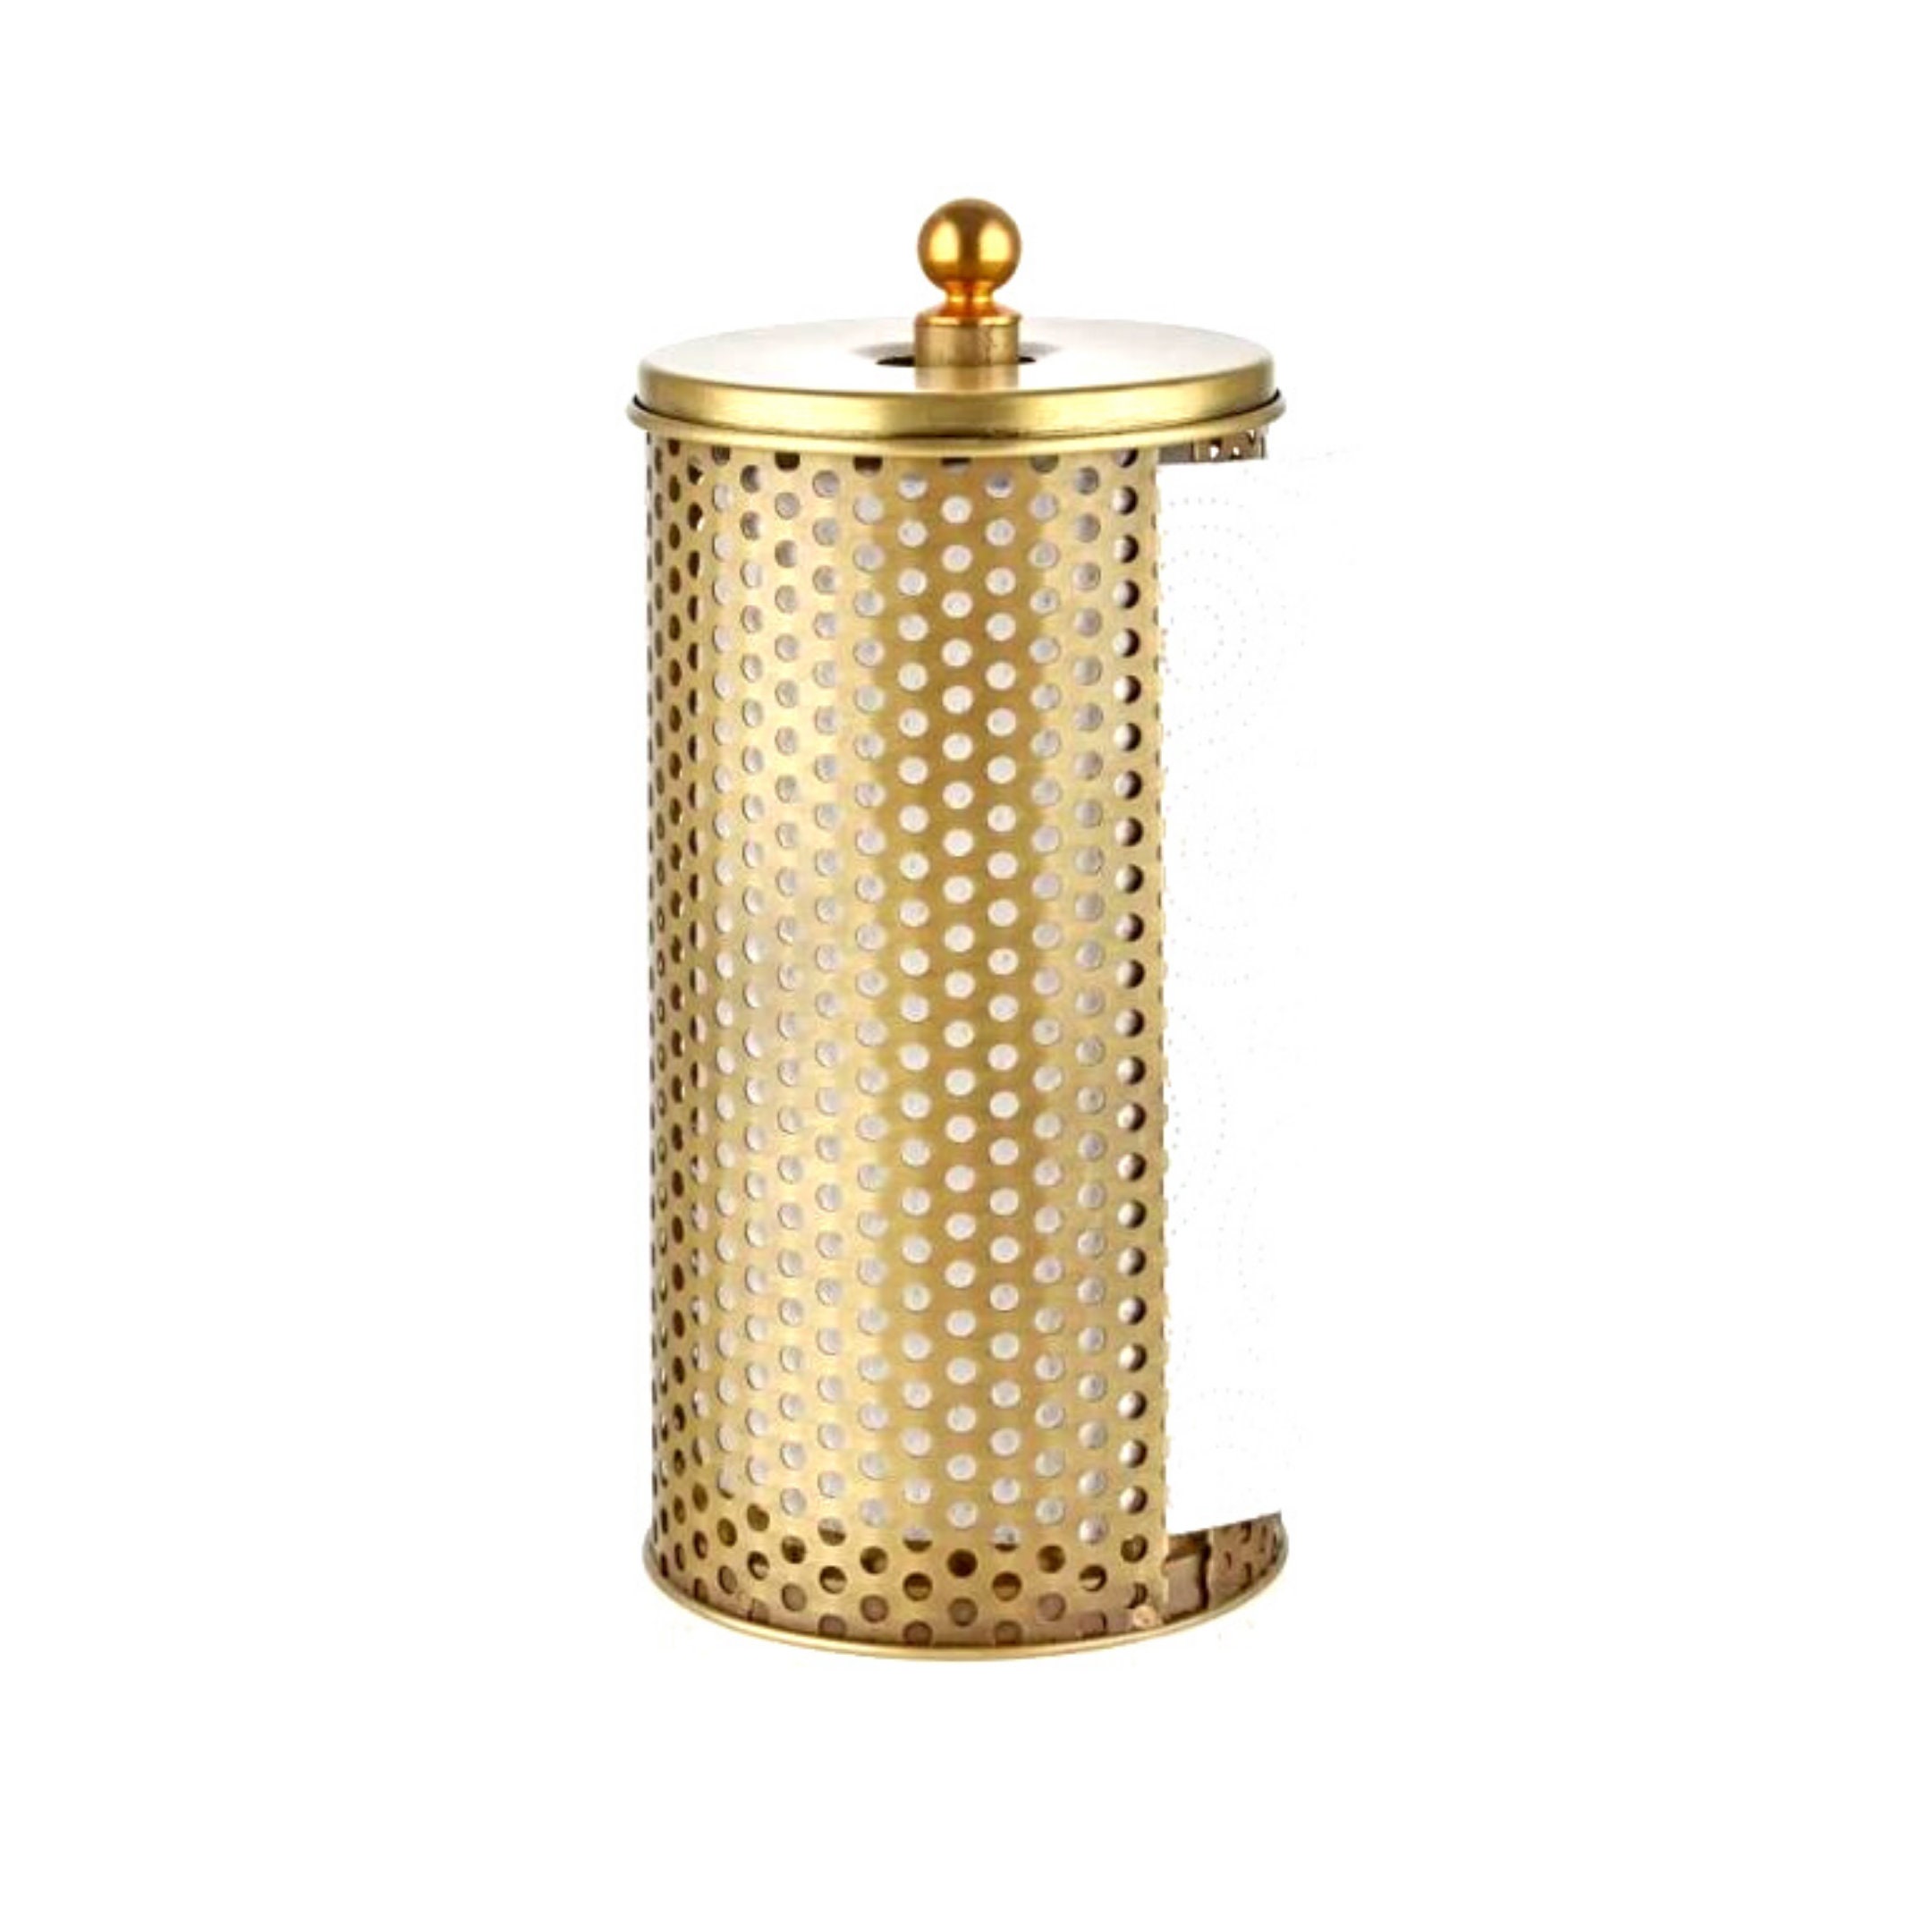 Individual Vintage Brass Bathroom Accessories Tissue Square, Tissue Flat  and Fingertip Towel Holder 